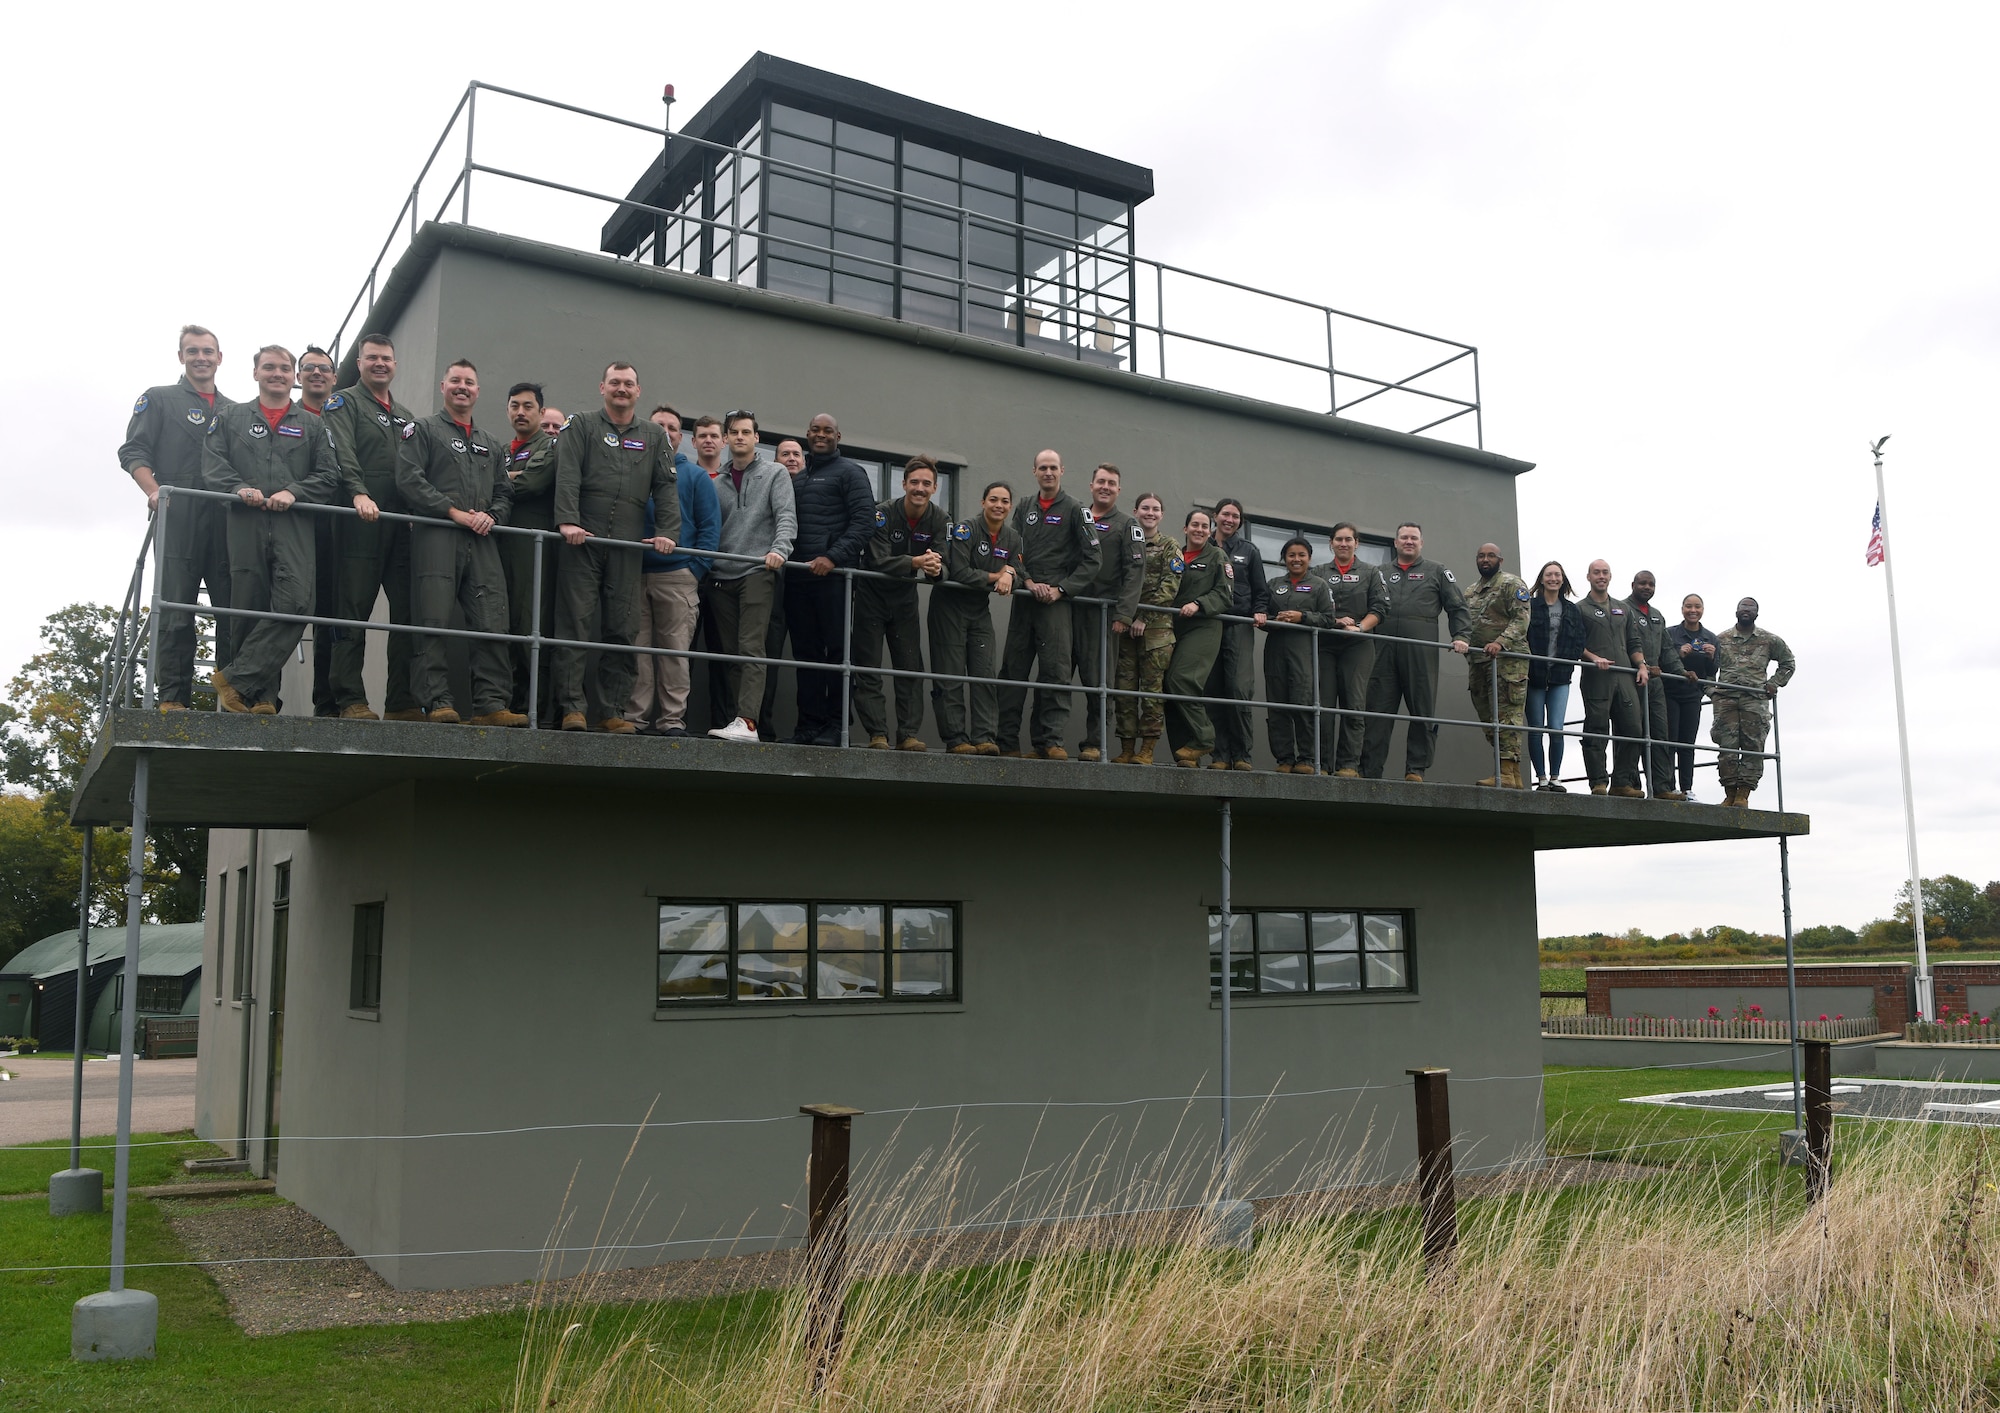 U.S. Air Force Airmen from the 351st Air Refueling Squadron gather on the Thorpe Abbotts air traffic control tower after a patching ceremony at the 100th Bomb Group Memorial Museum at Thorpe Abbotts, England, Oct. 14, 2022. The patching ceremony tradition dates back to World War II and the “Buzzard” patch, presented to pilots and boom operators who have completed mission certification training, is the patch of the 351st Bomb Squadron which flew out of Thorpe Abbotts during World War II. (U.S. Air Force photo by Karen Abeyasekere)